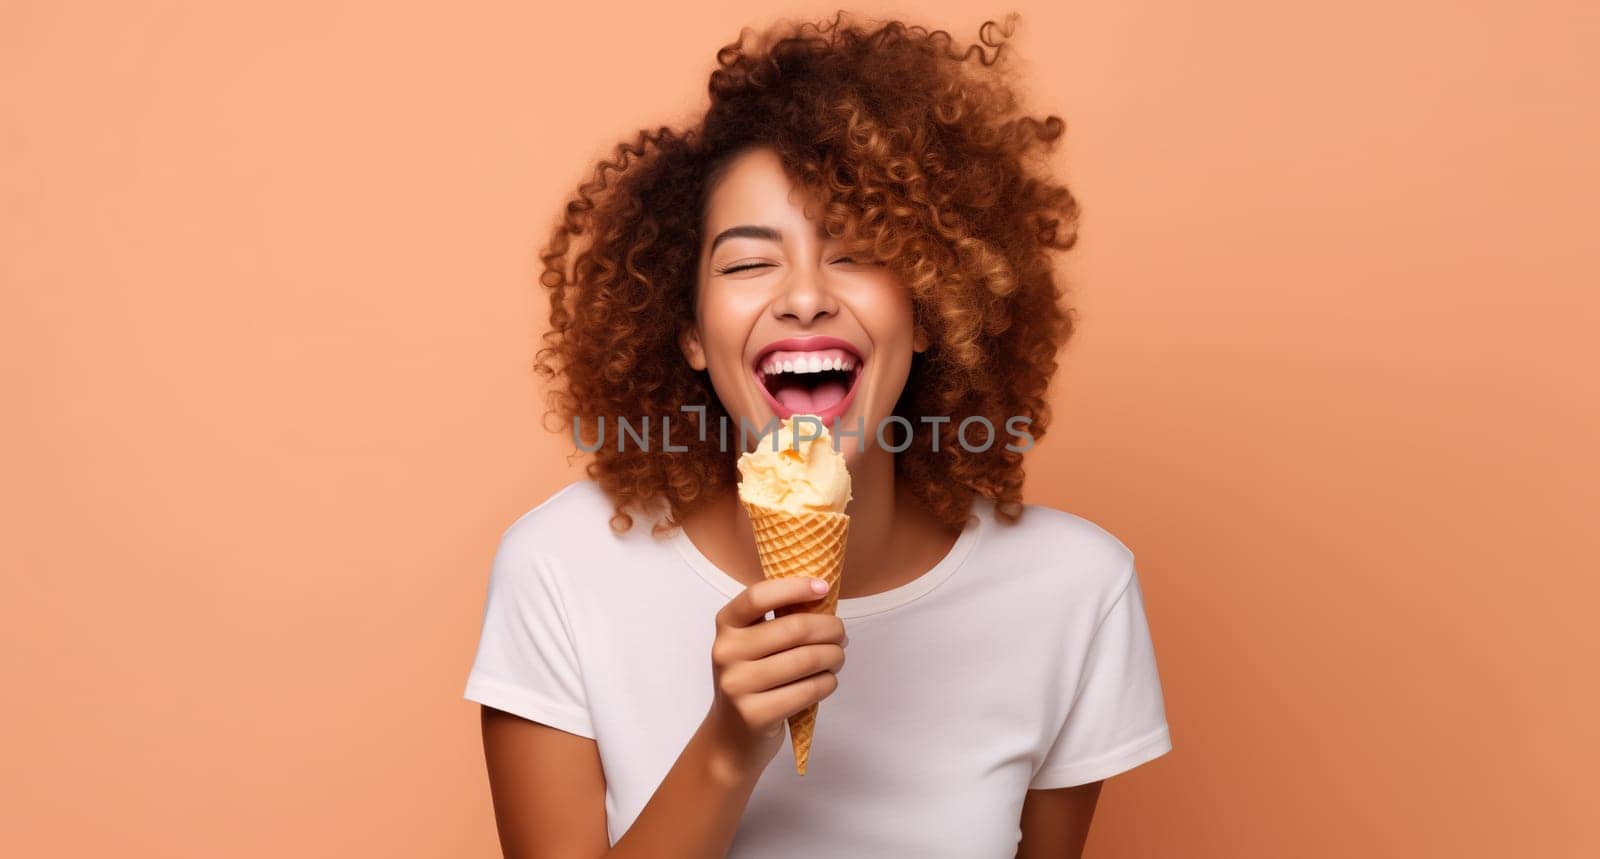 Summer portrait of happy cheerful smiling young woman eating ice cream cone, curly hair, on orange studio background